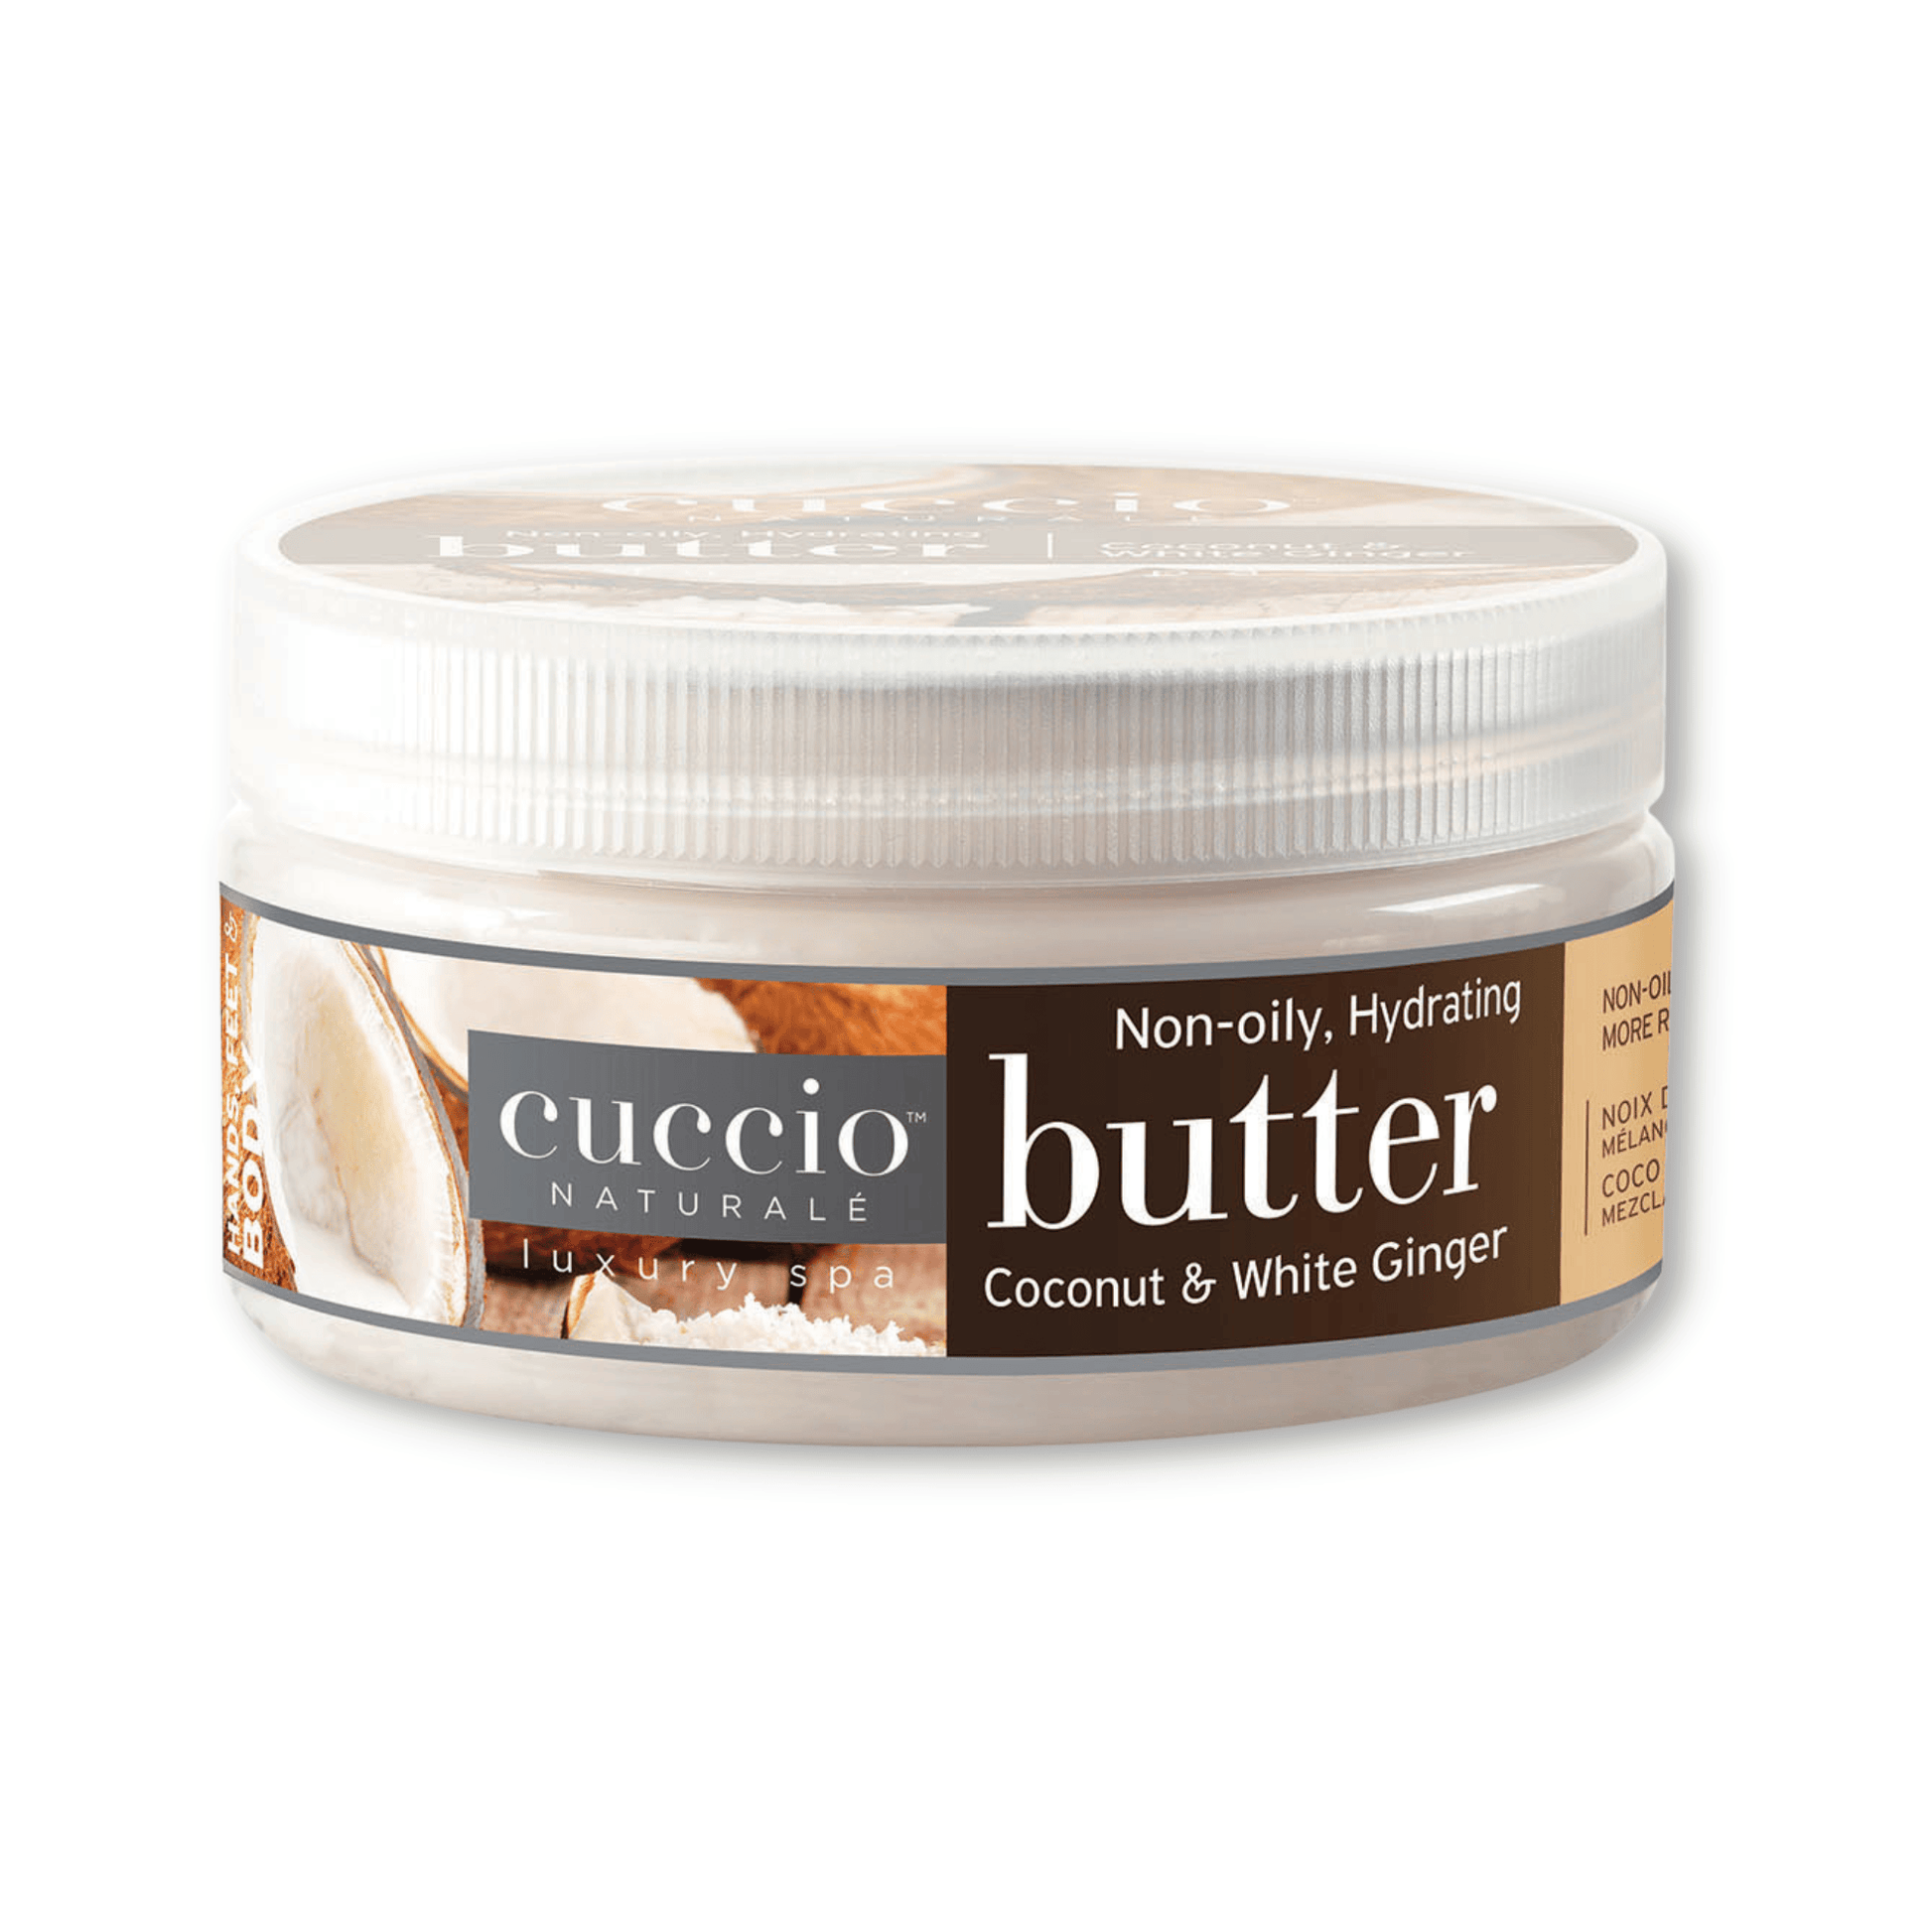 Cuccio Naturalé Hydrating Butter - Coconut & White Ginger 226gr